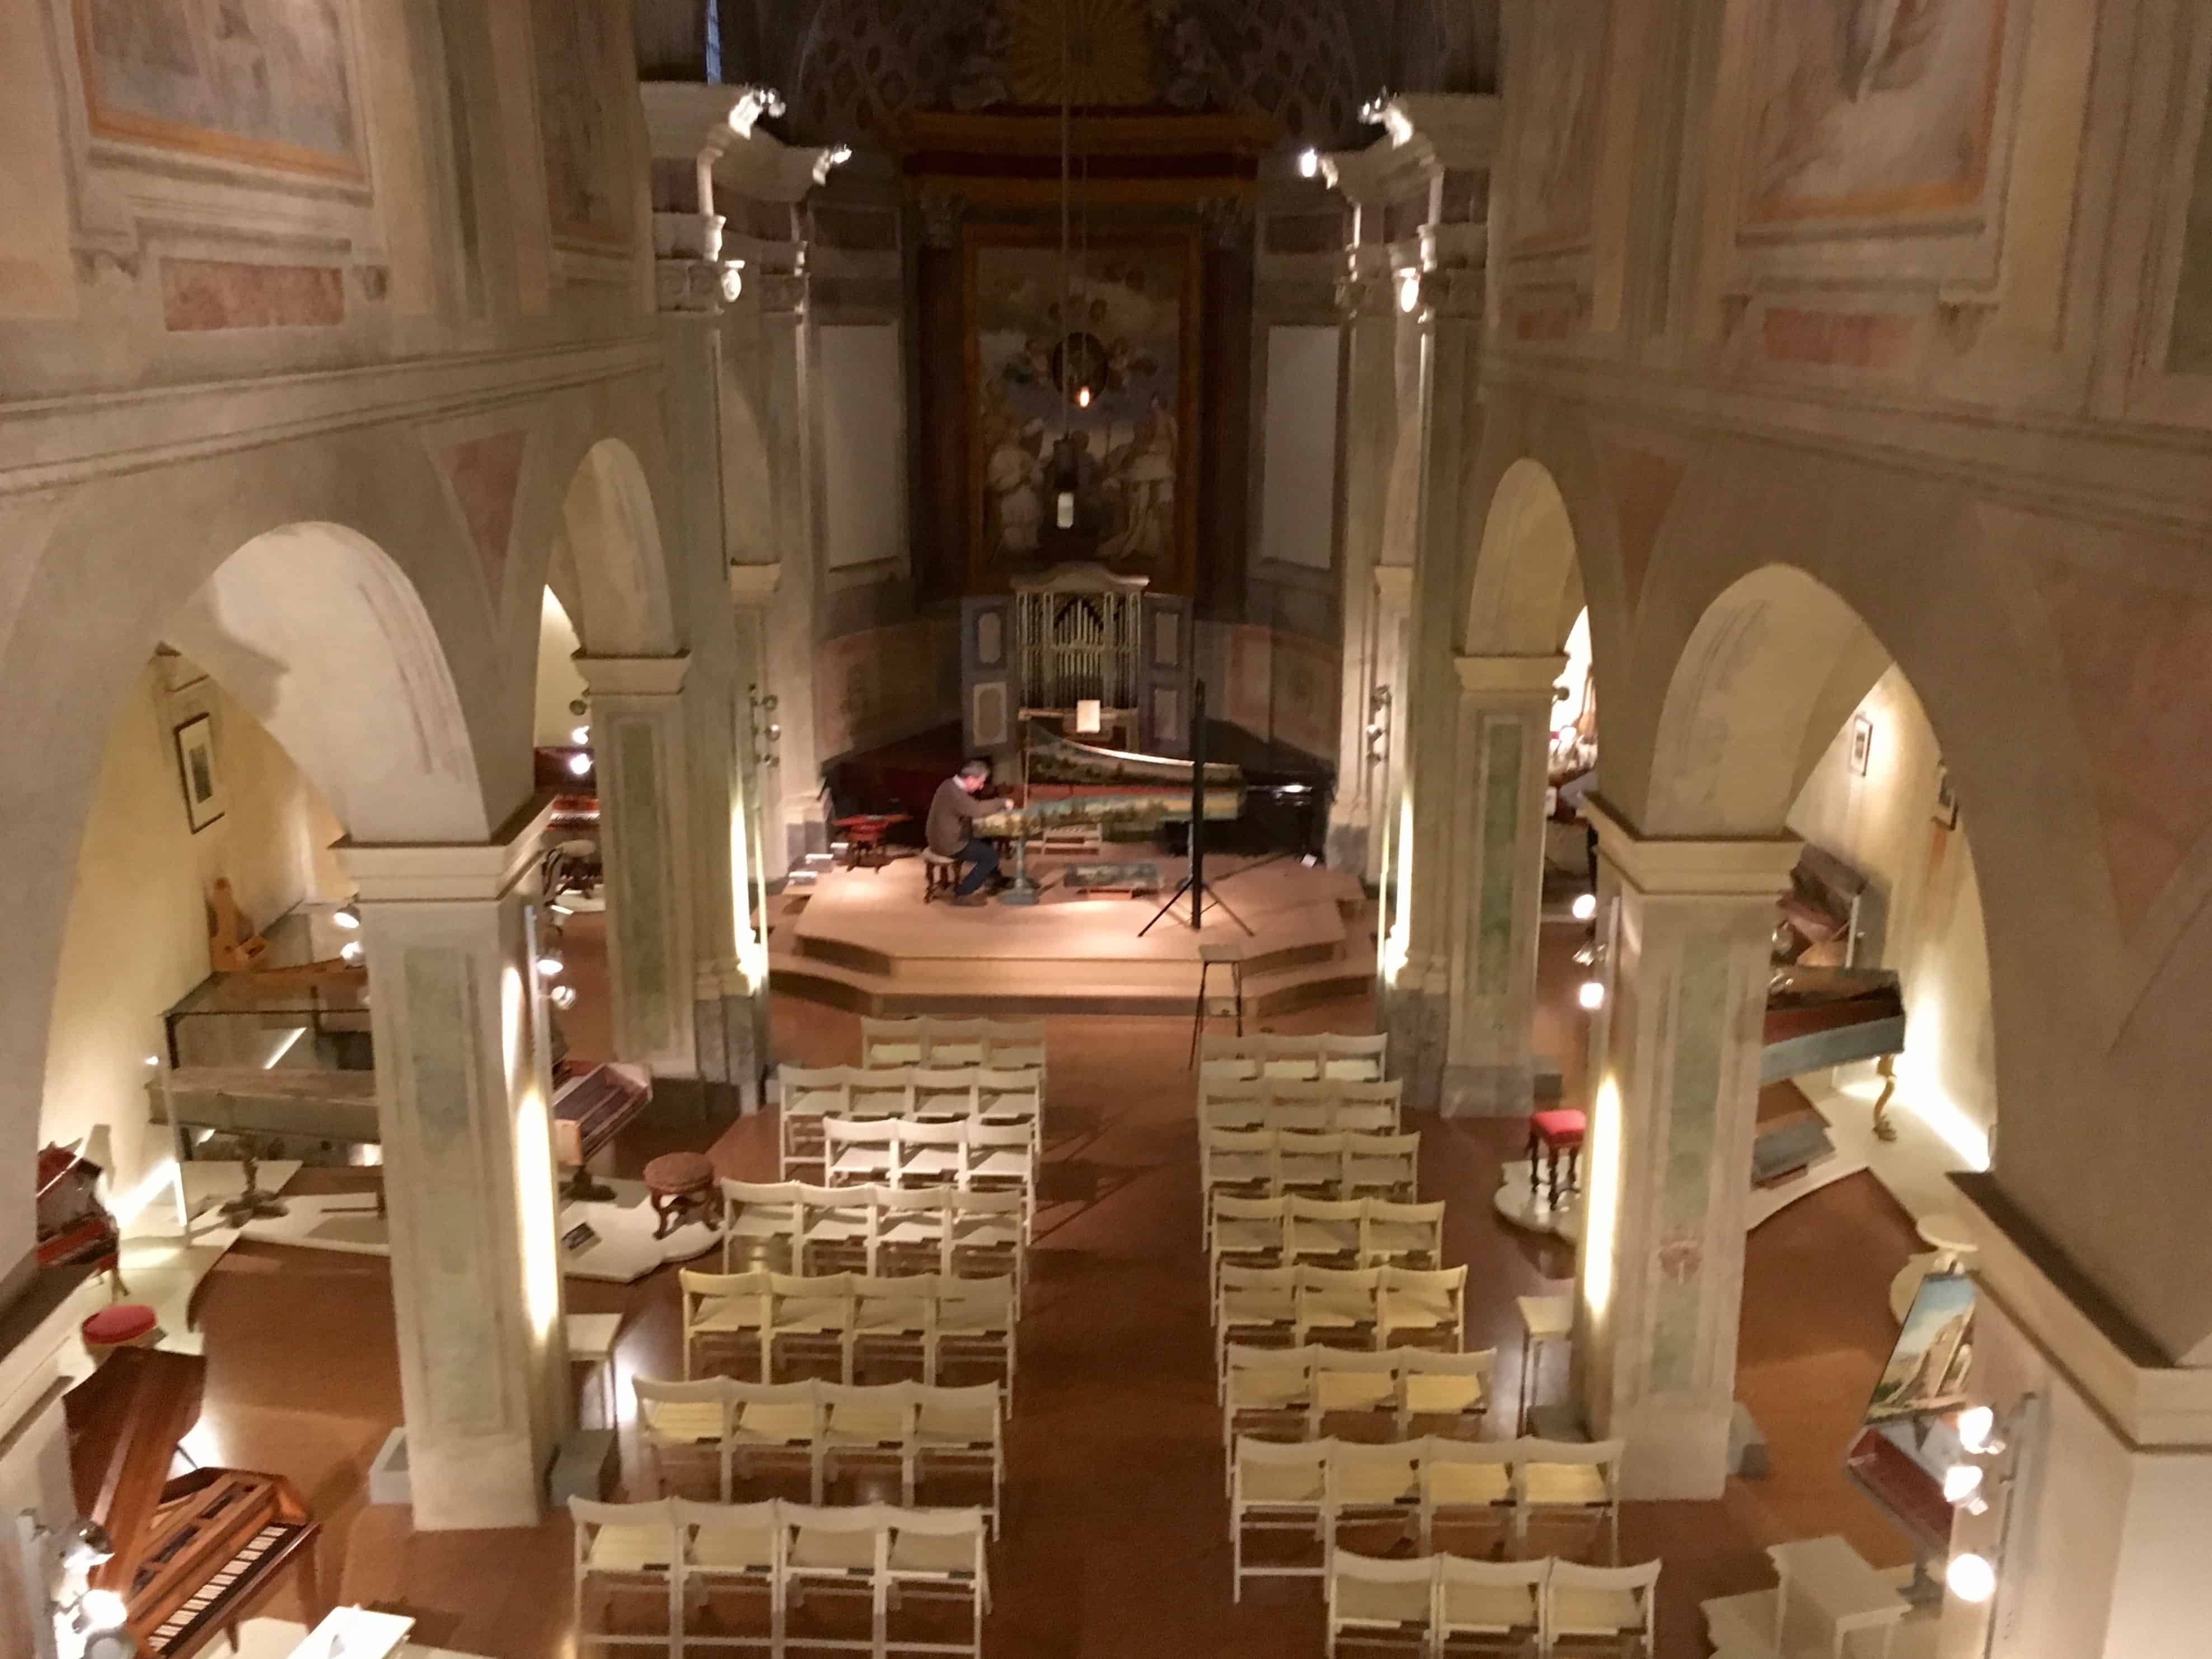 Delightful restored interior of Chiesa di San Colombano, now a musical museum in Bologna, Italy